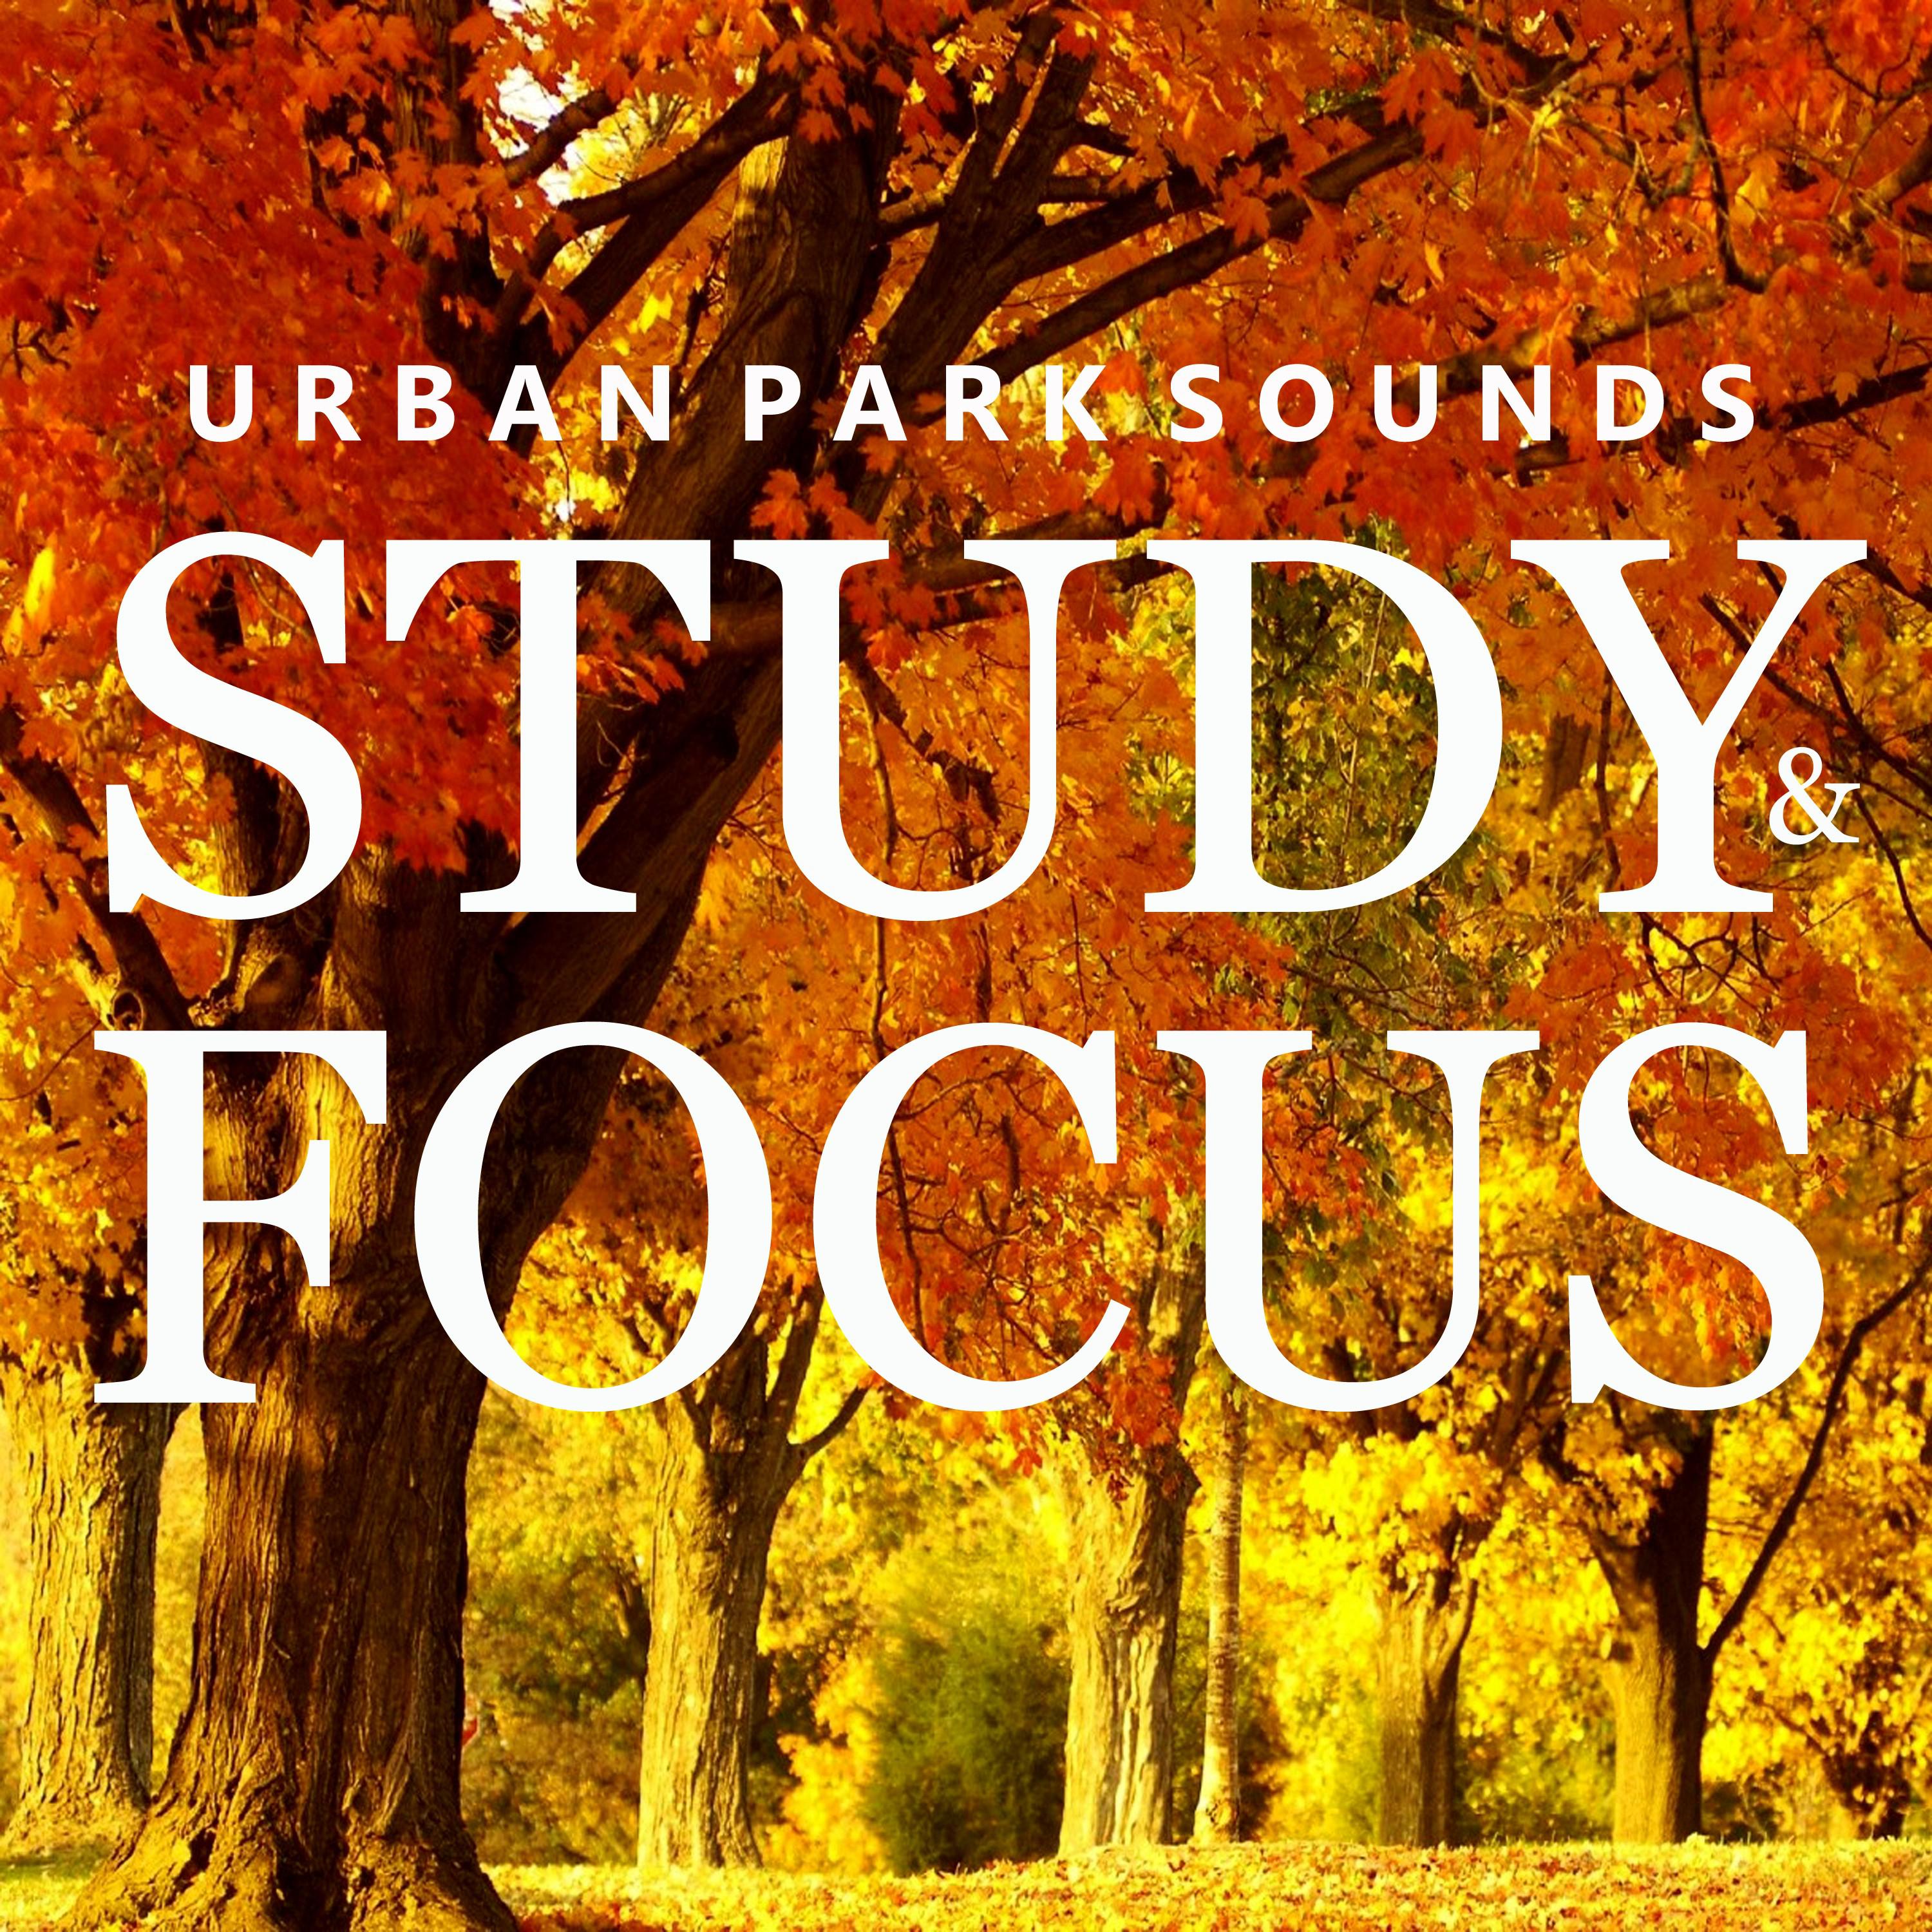 Urban Park Sounds for Studying, Pt. 48